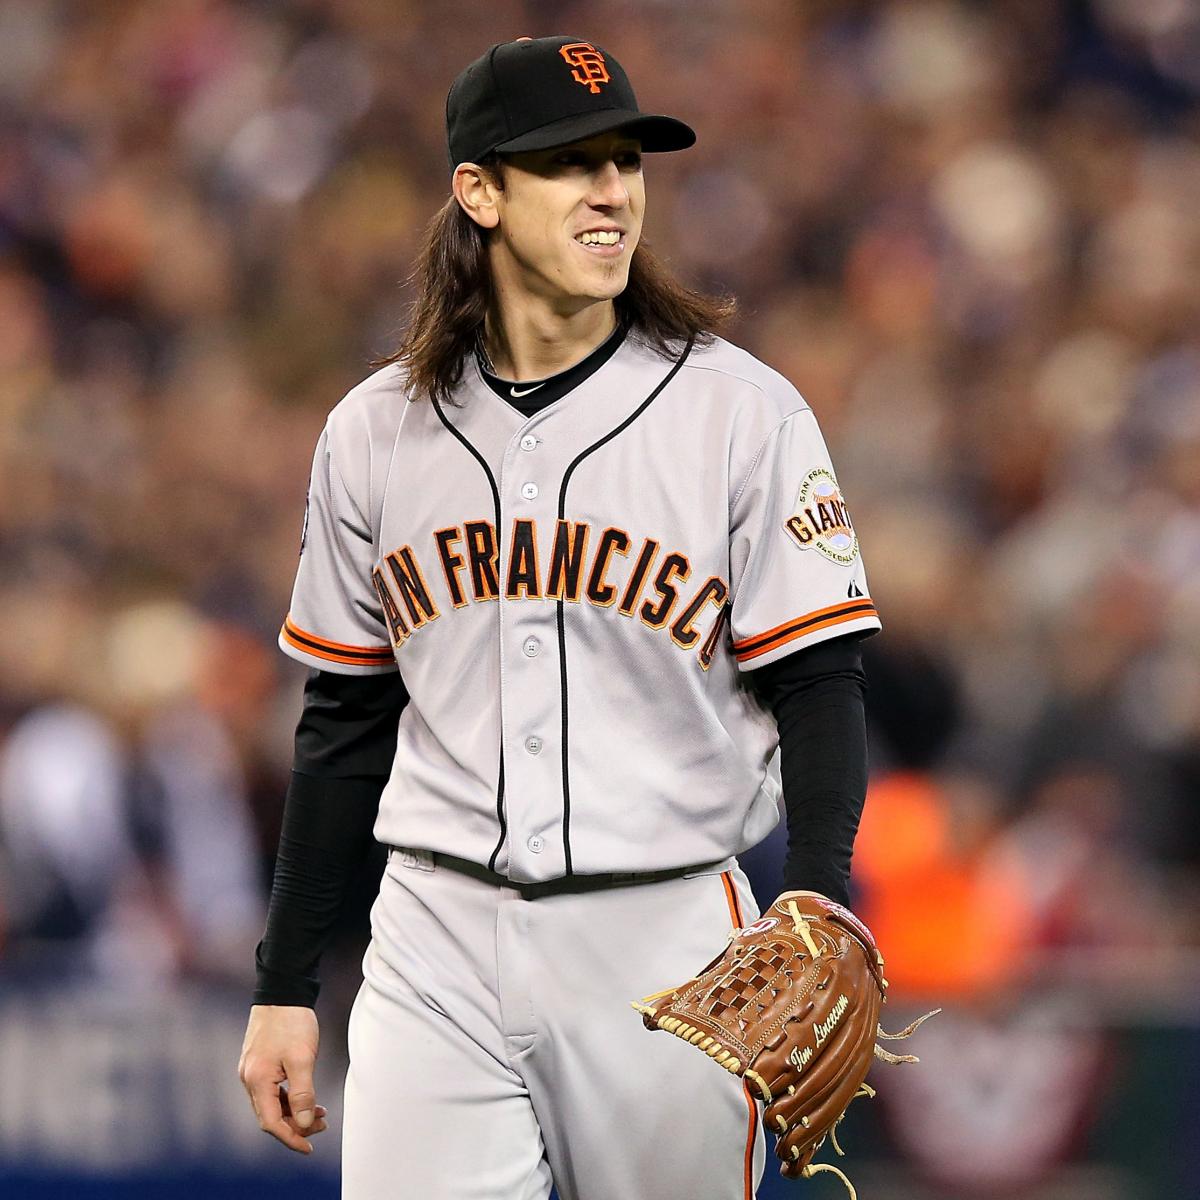 Giants' Tim Lincecum enters World Series as non-entity – New York Daily News